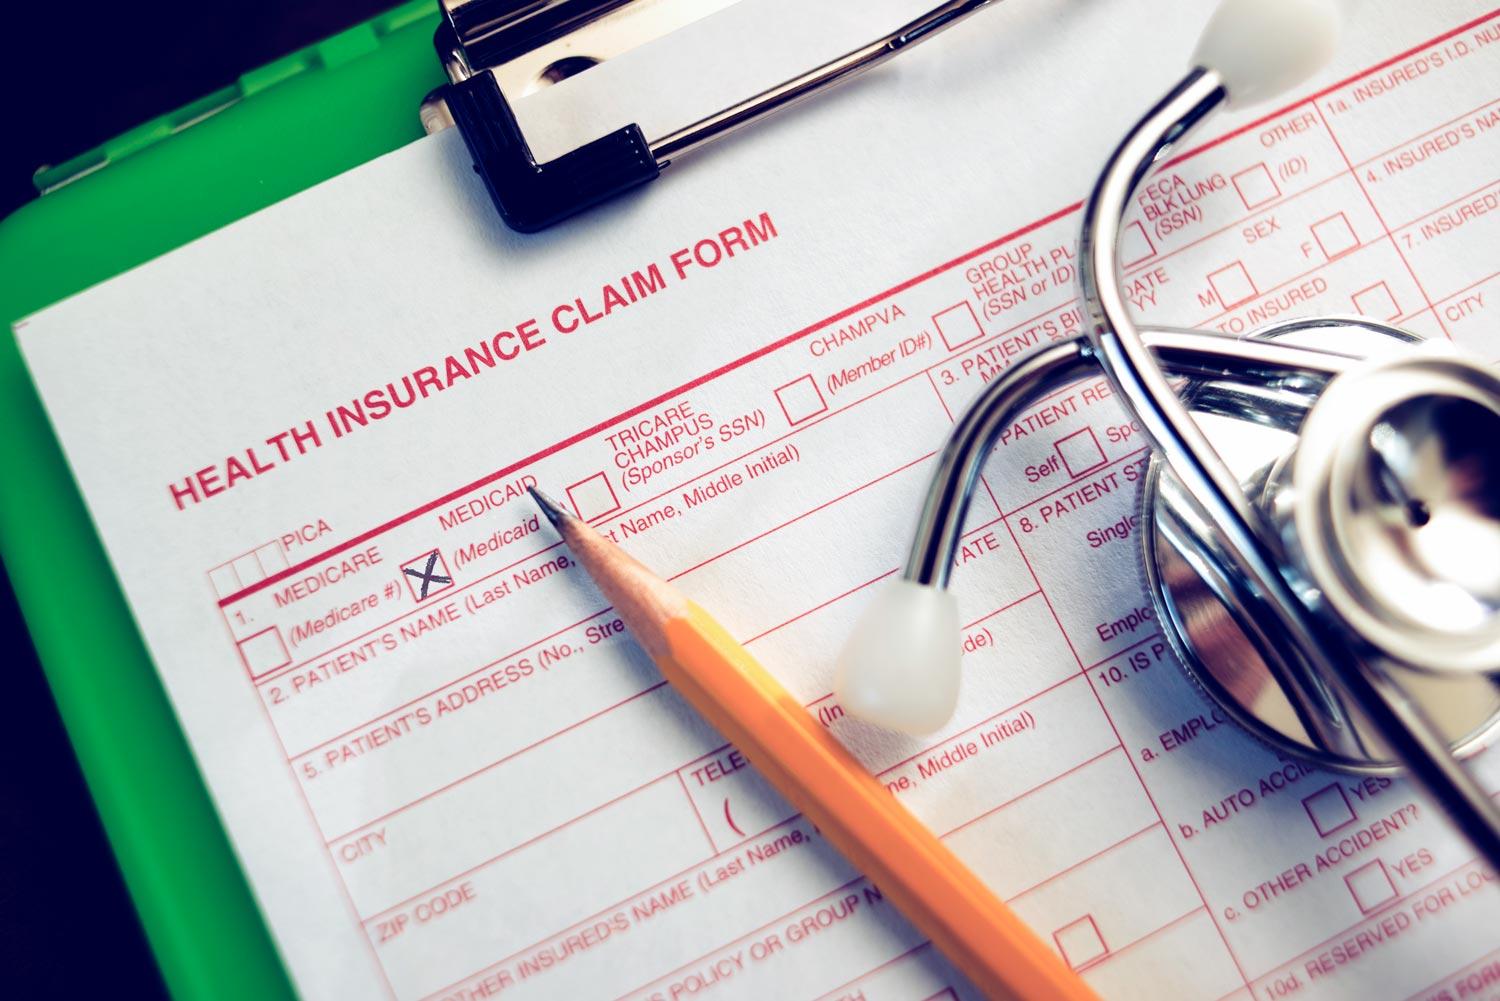 Health Insurance Claim Form with Medicaid box checked